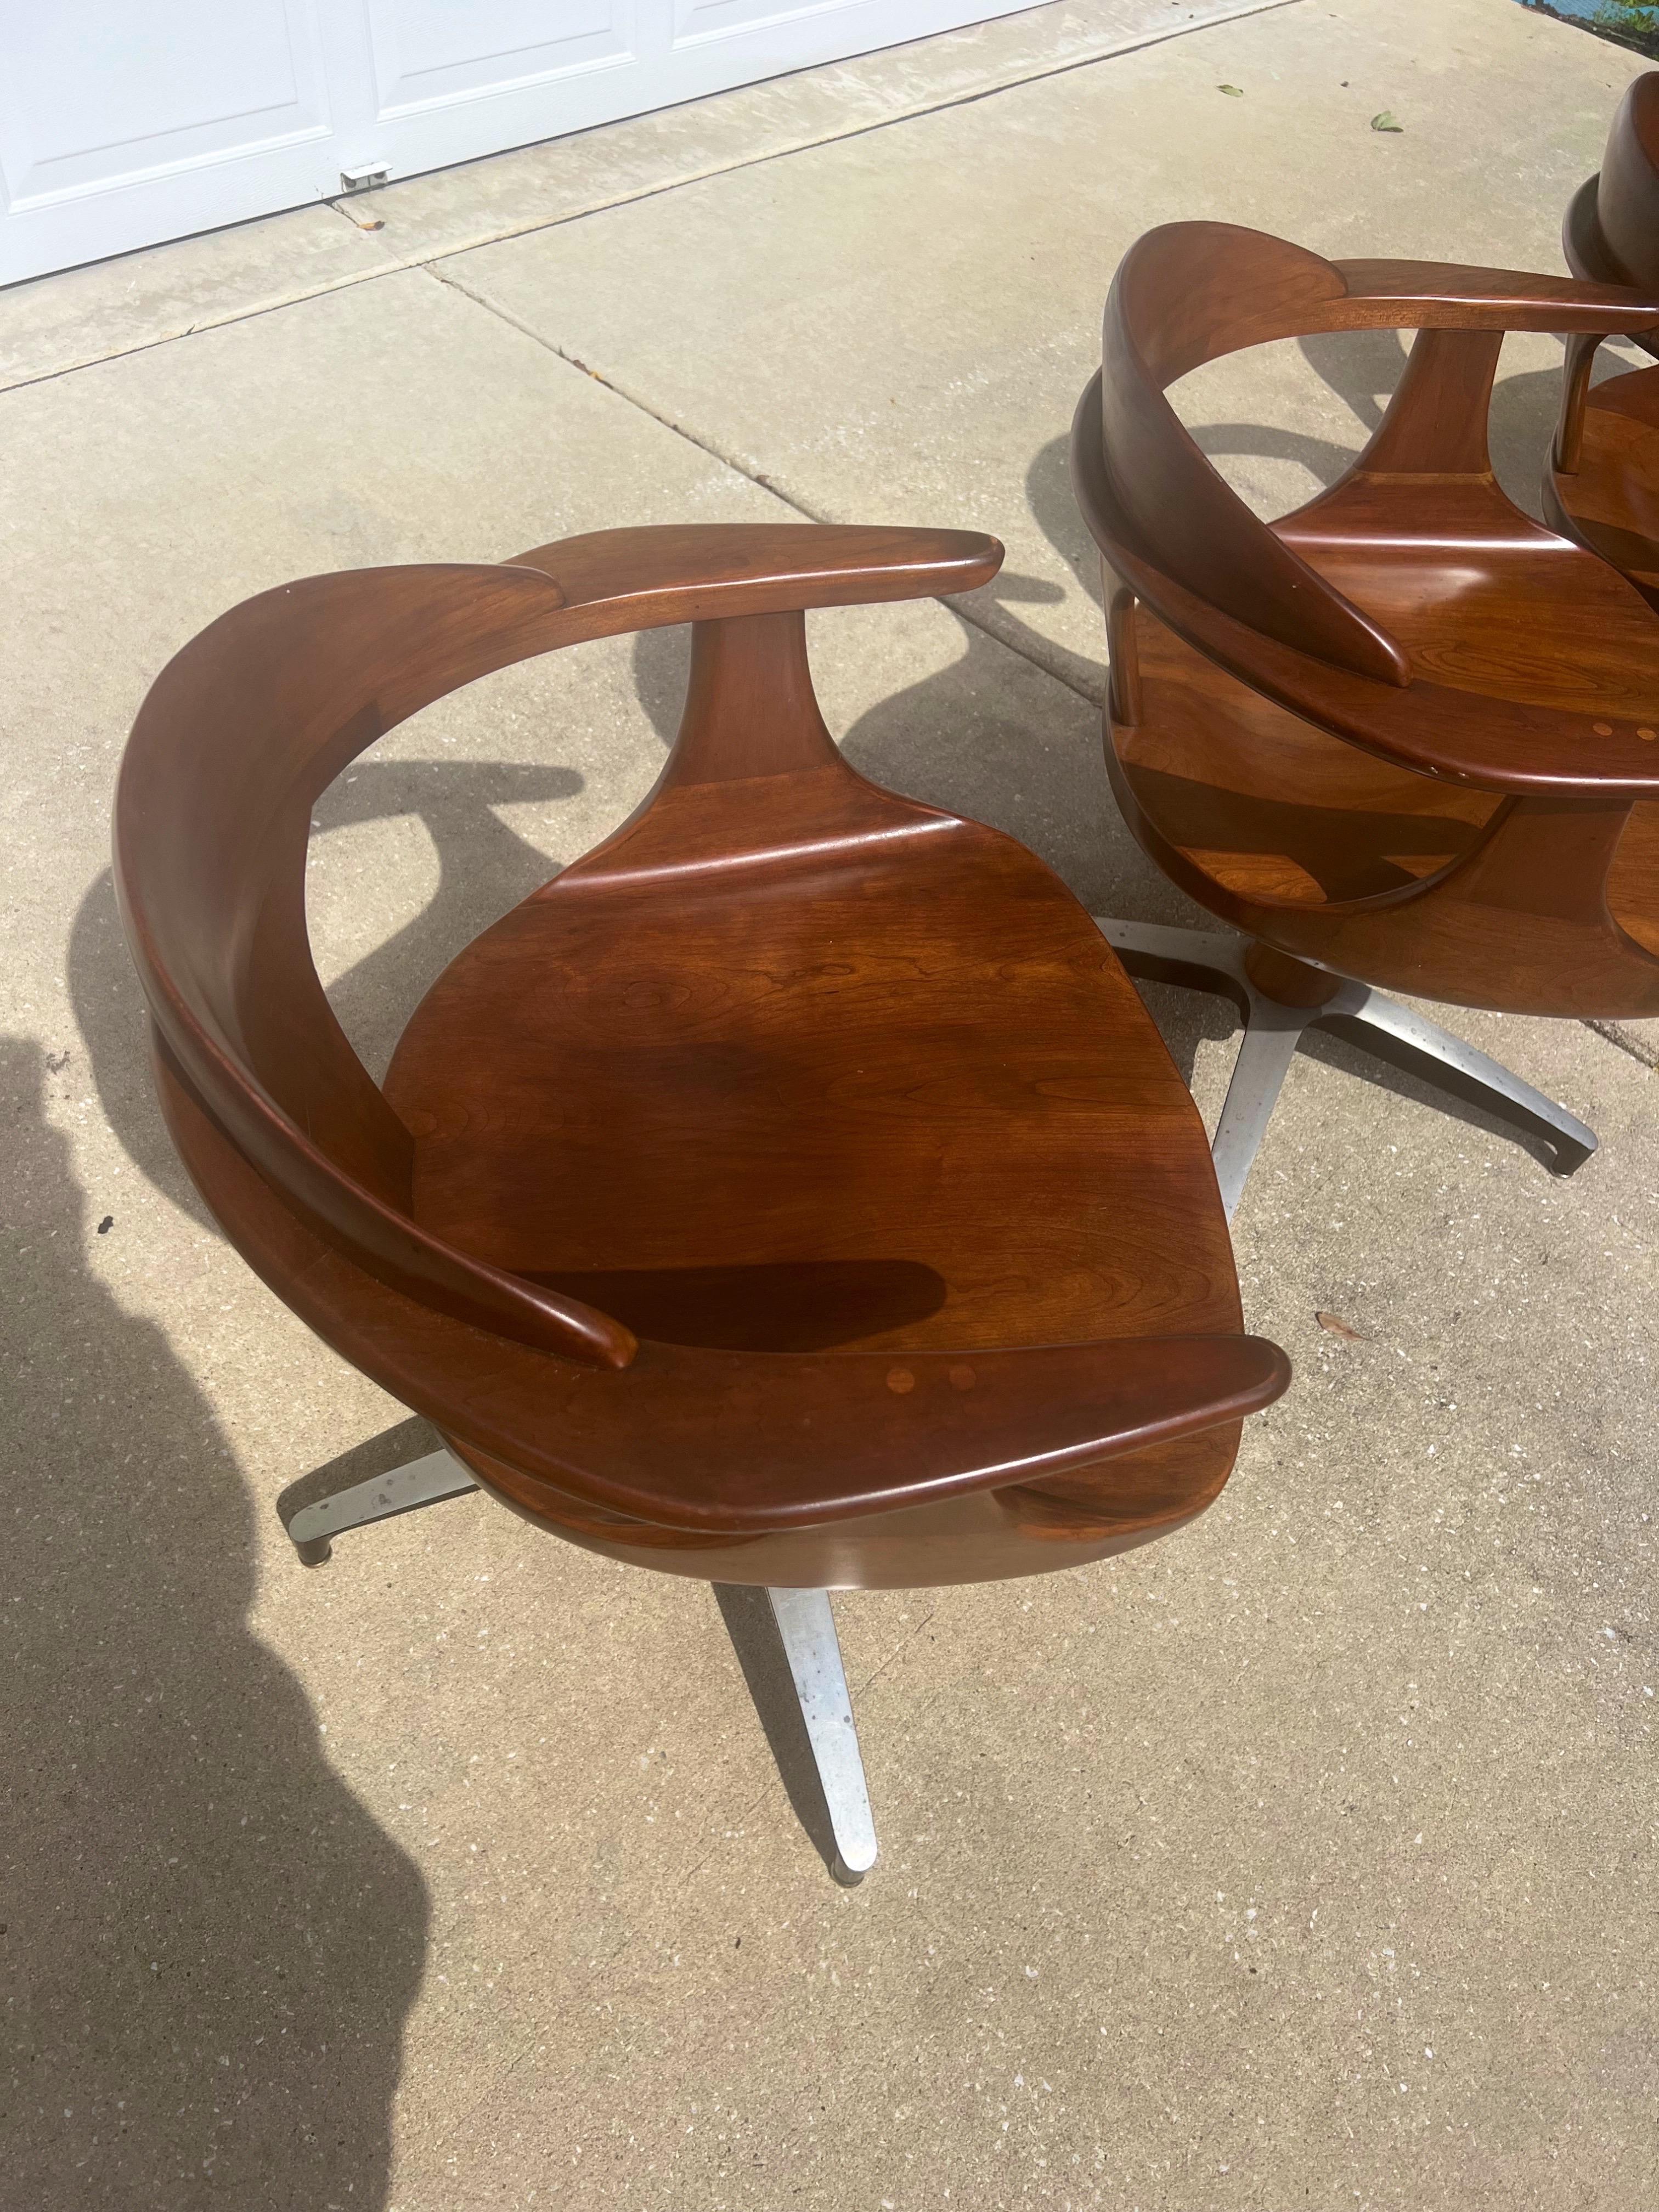 1960s Heywood Wakefield “Cliff House” Dining Table and Chairs, a Set of 5 For Sale 3